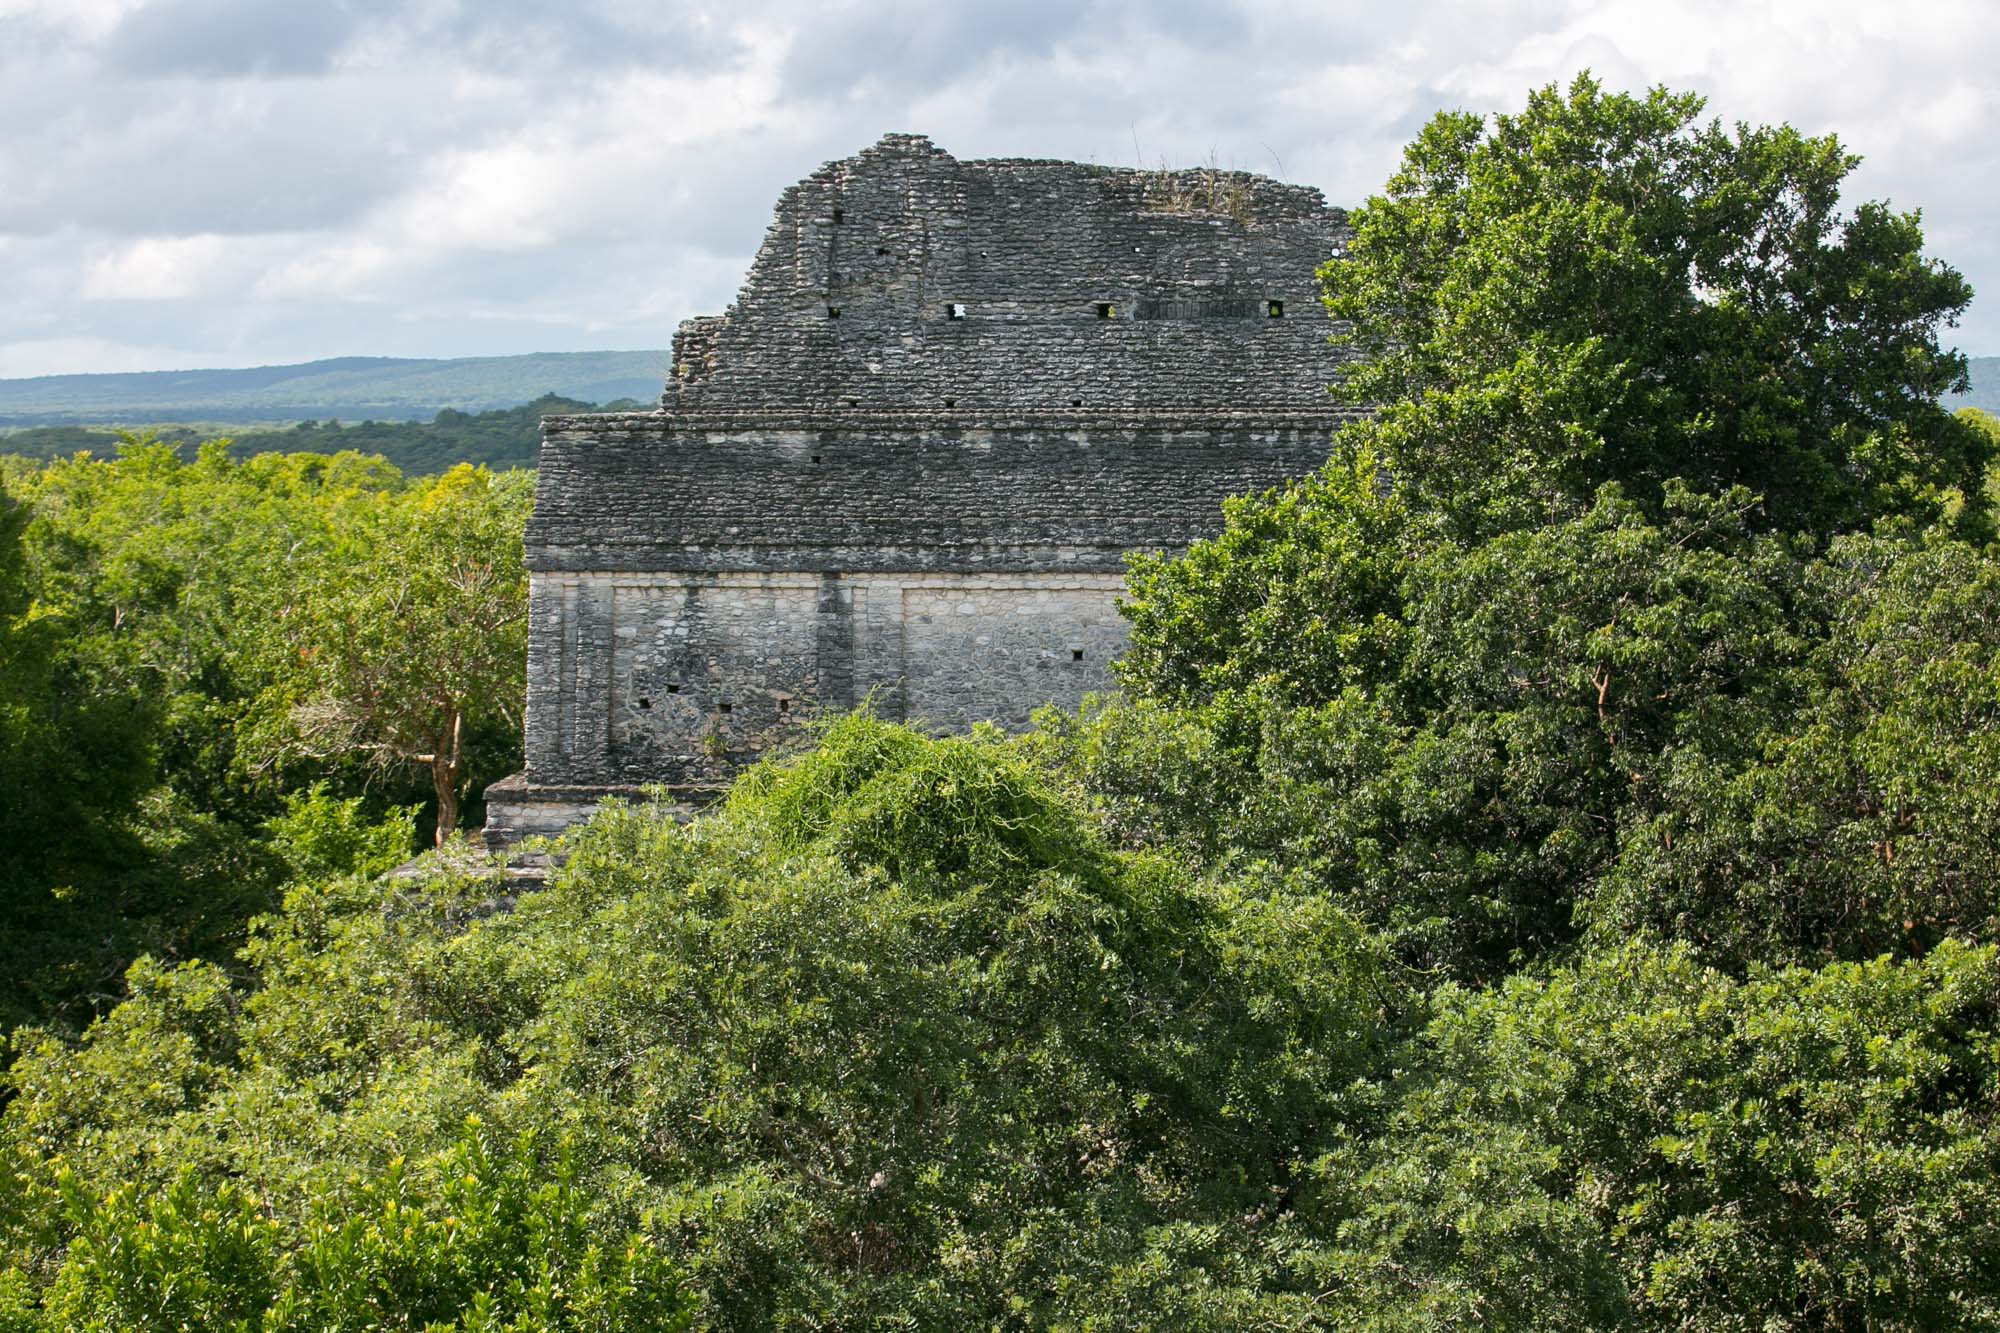 Mayan ruins of Dzibanche in Mexico